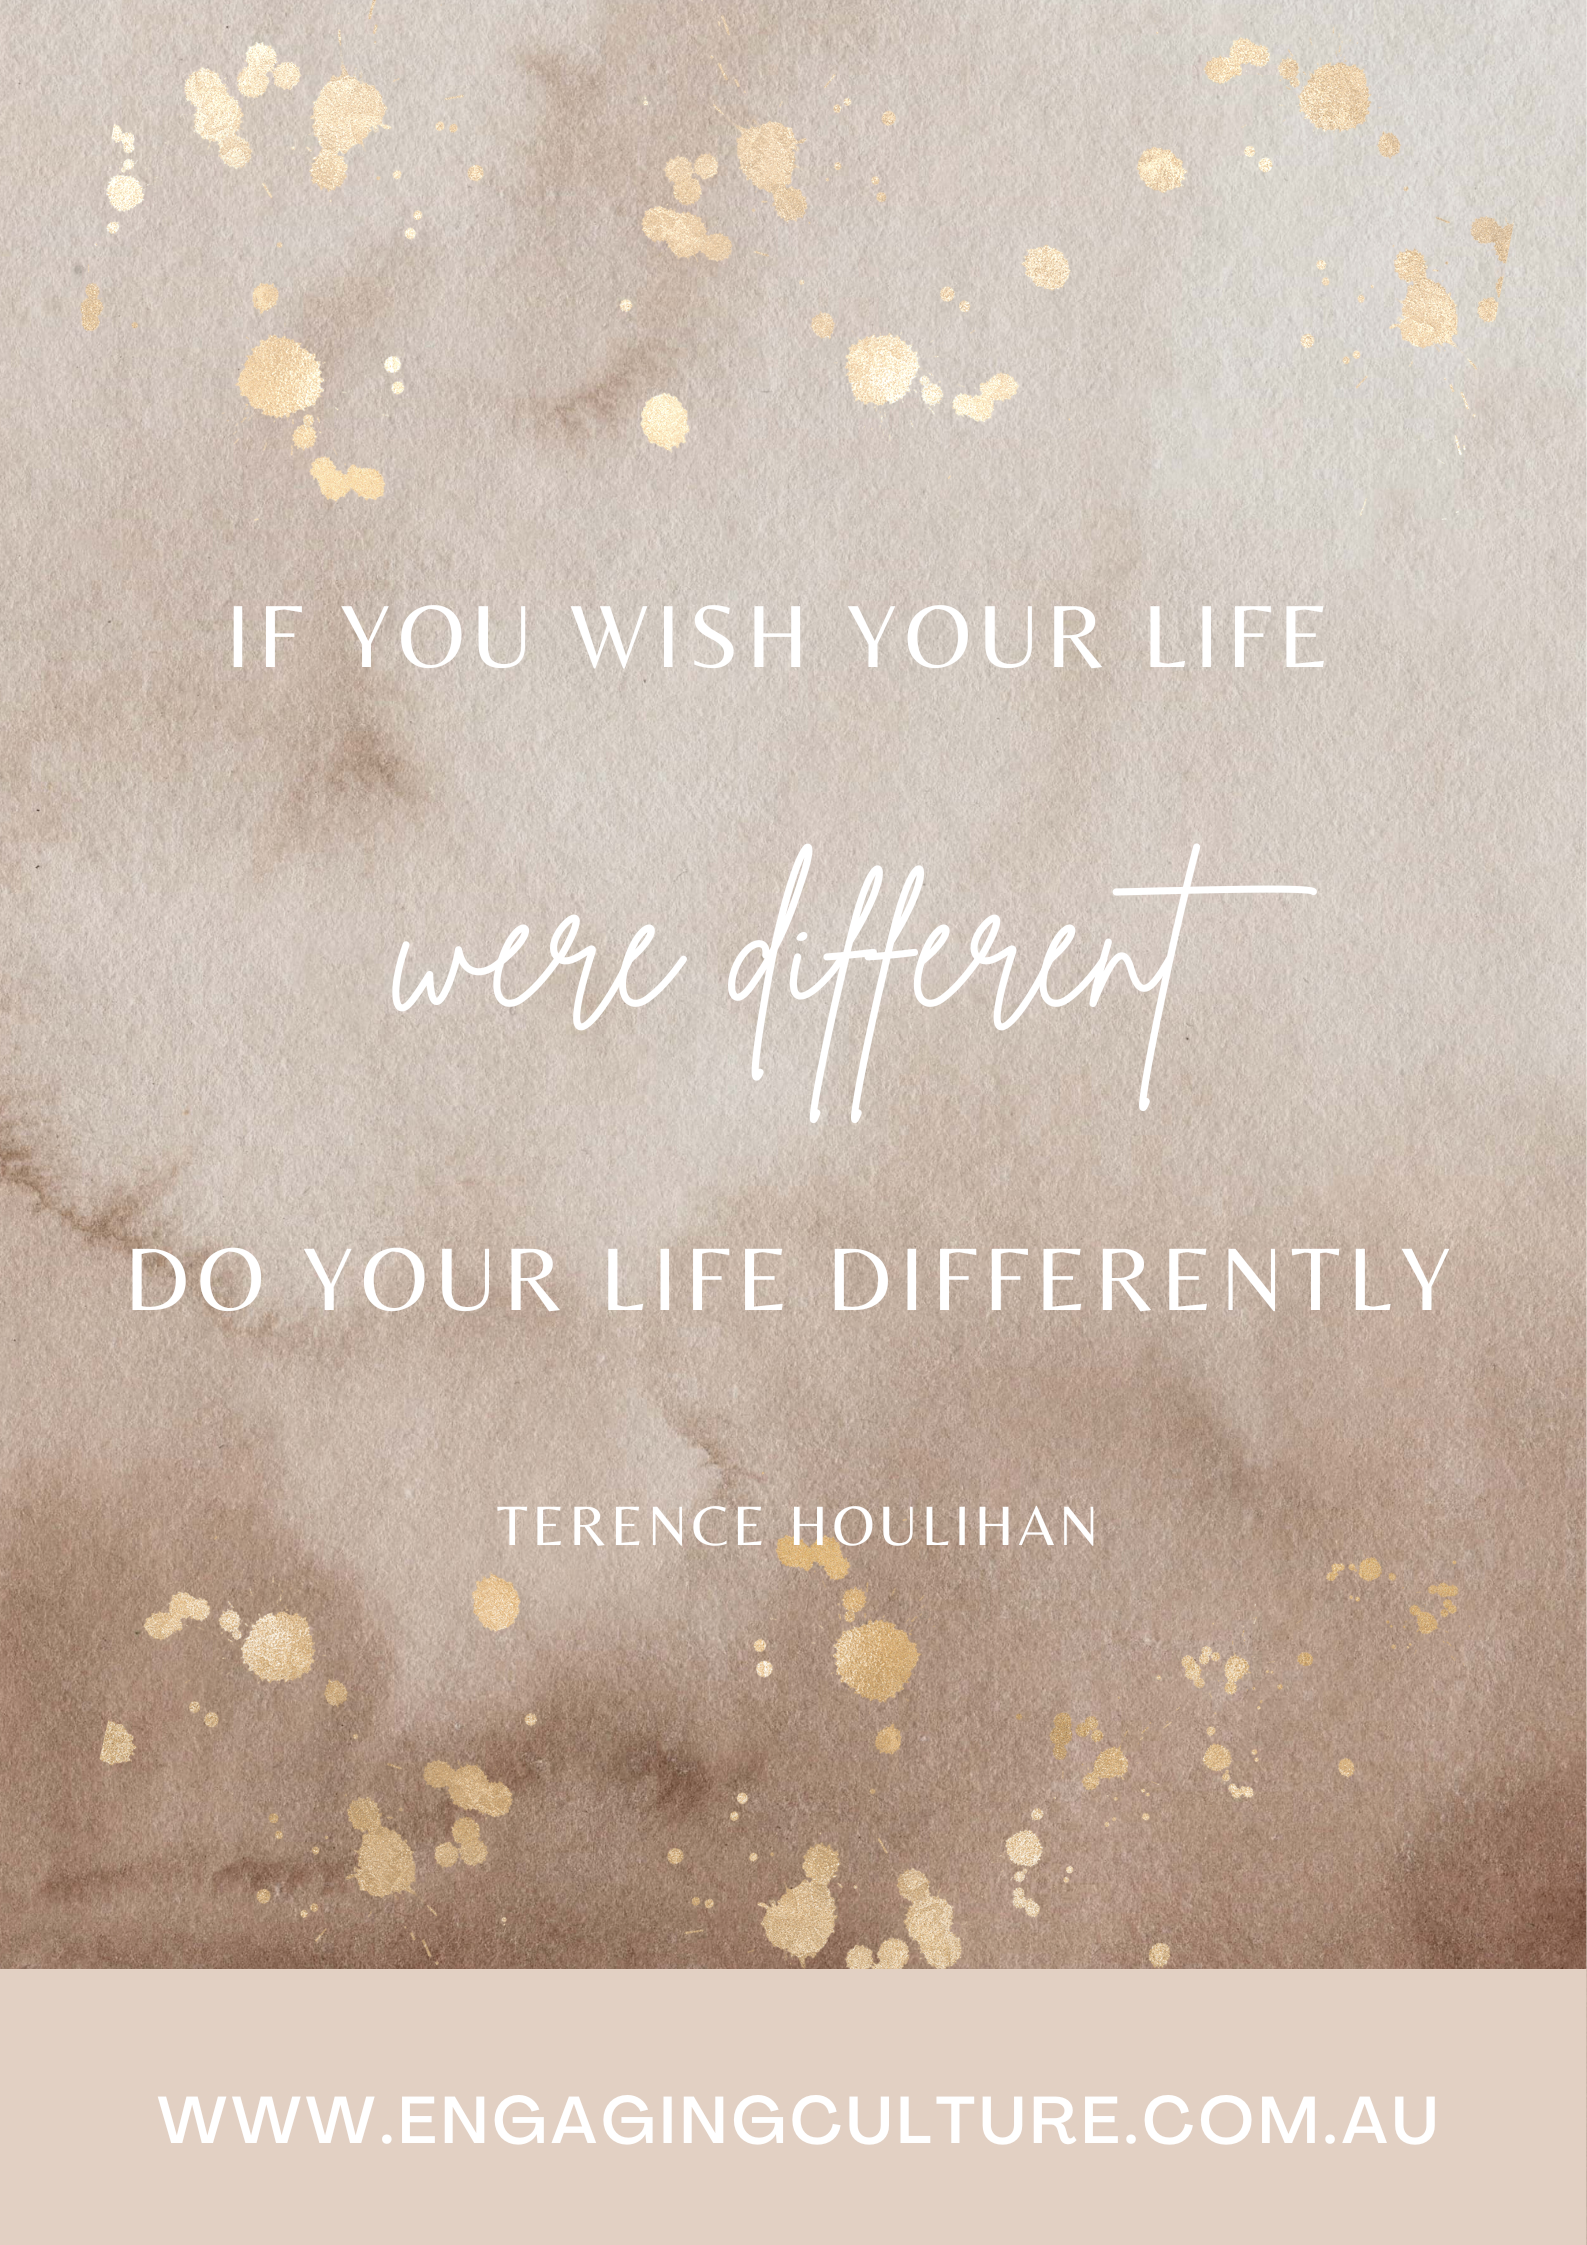 If you wish your life were different, do your life differently